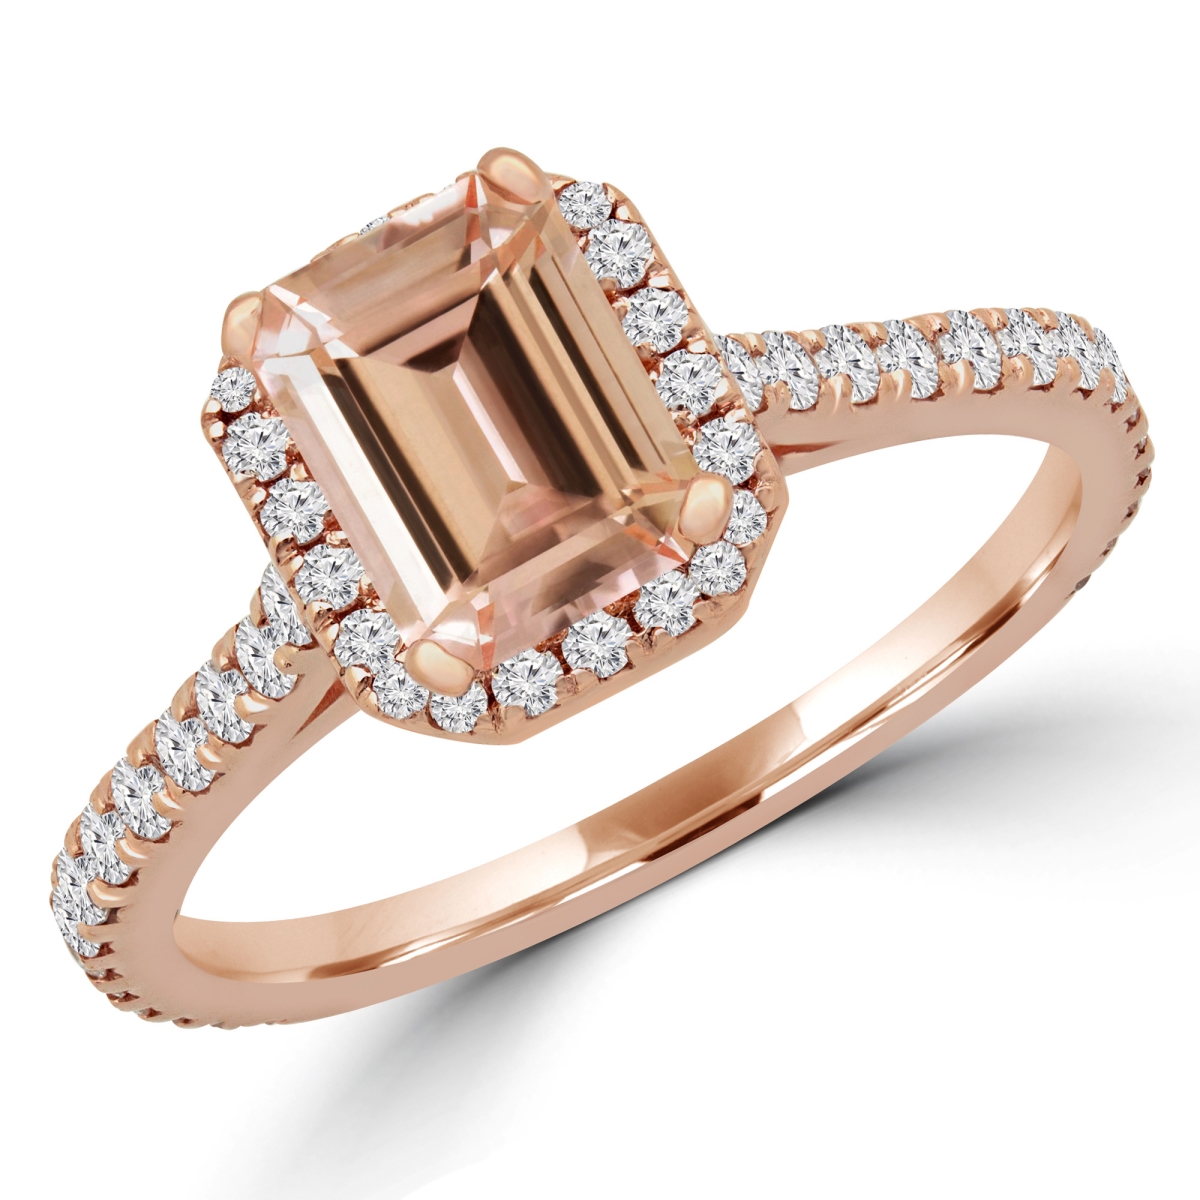 Picture of Majesty Diamonds MD180580-4 1.25 CTW Emerald Pink Morganite Halo Engagement Ring in 14K Rose Gold - Size 4